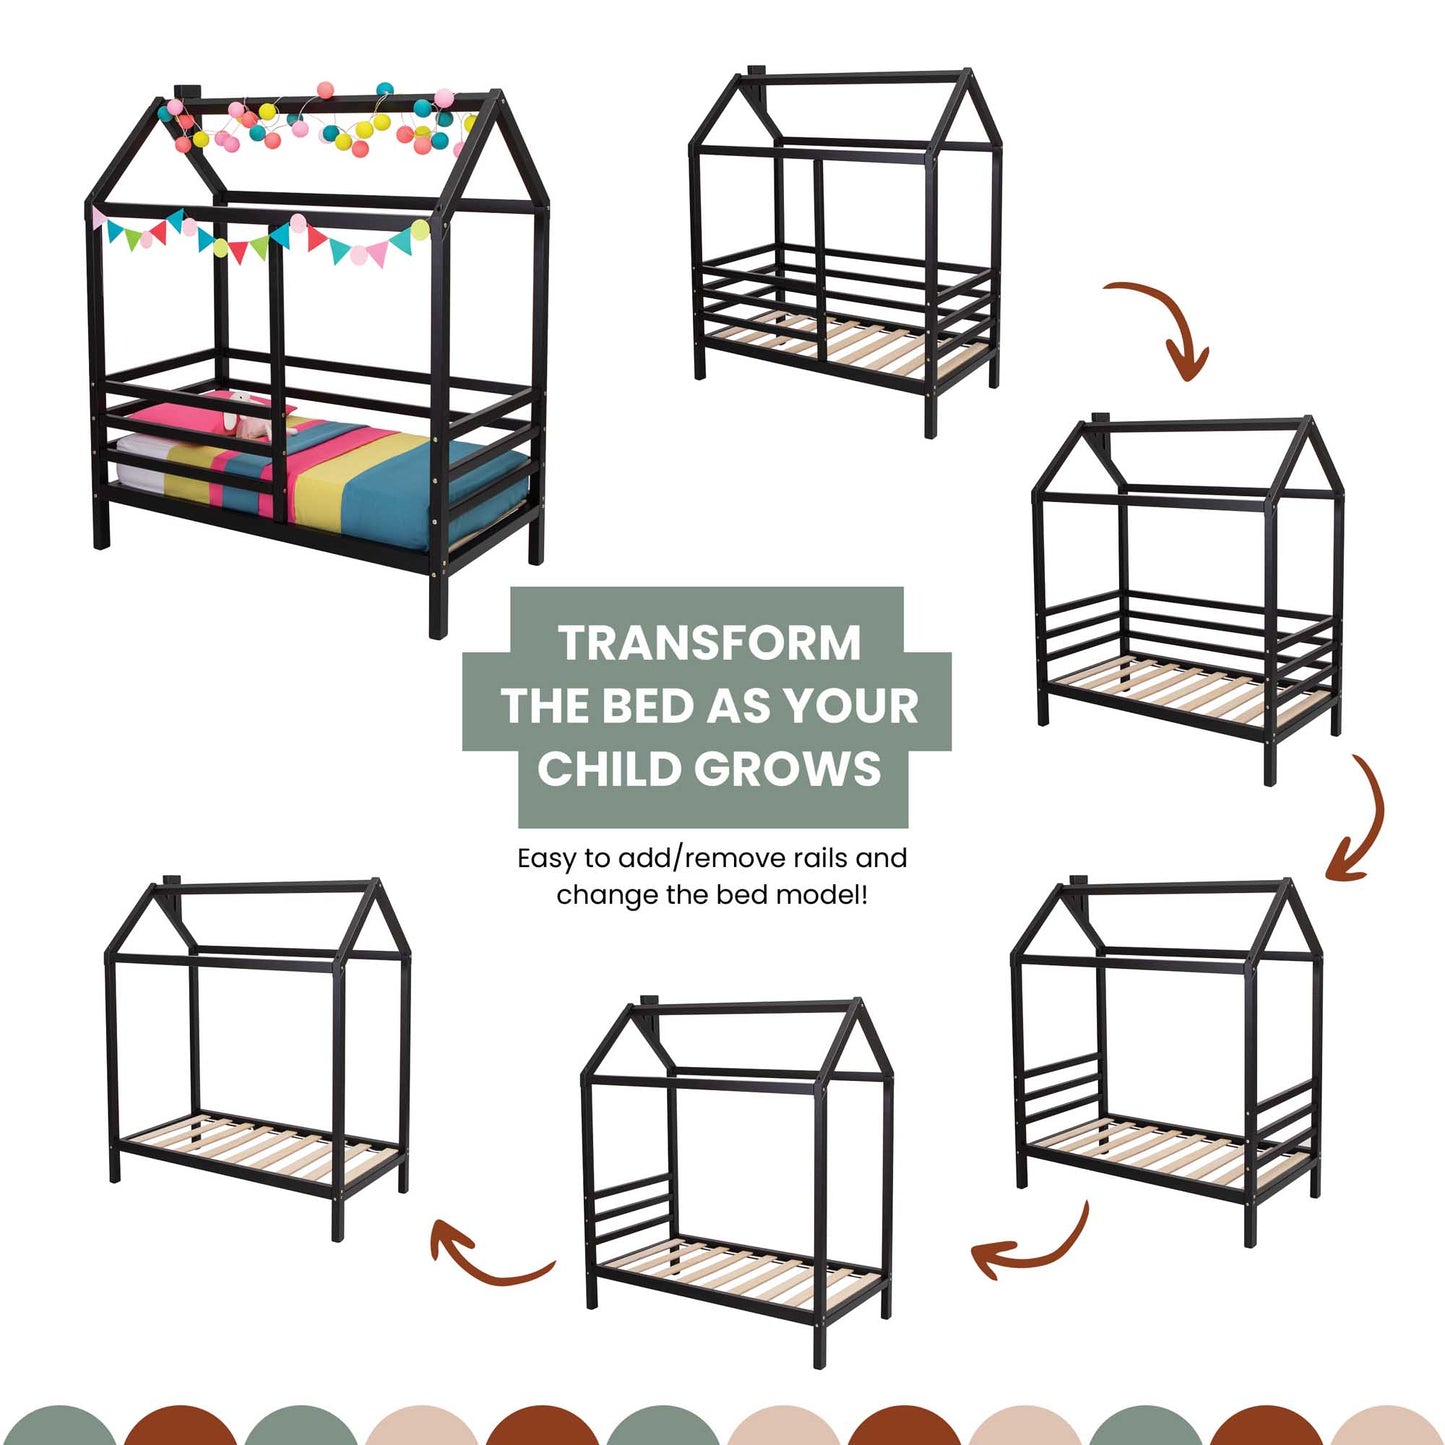 Elevate the bed as your child grows with a Wooden house bed on legs with a fence.